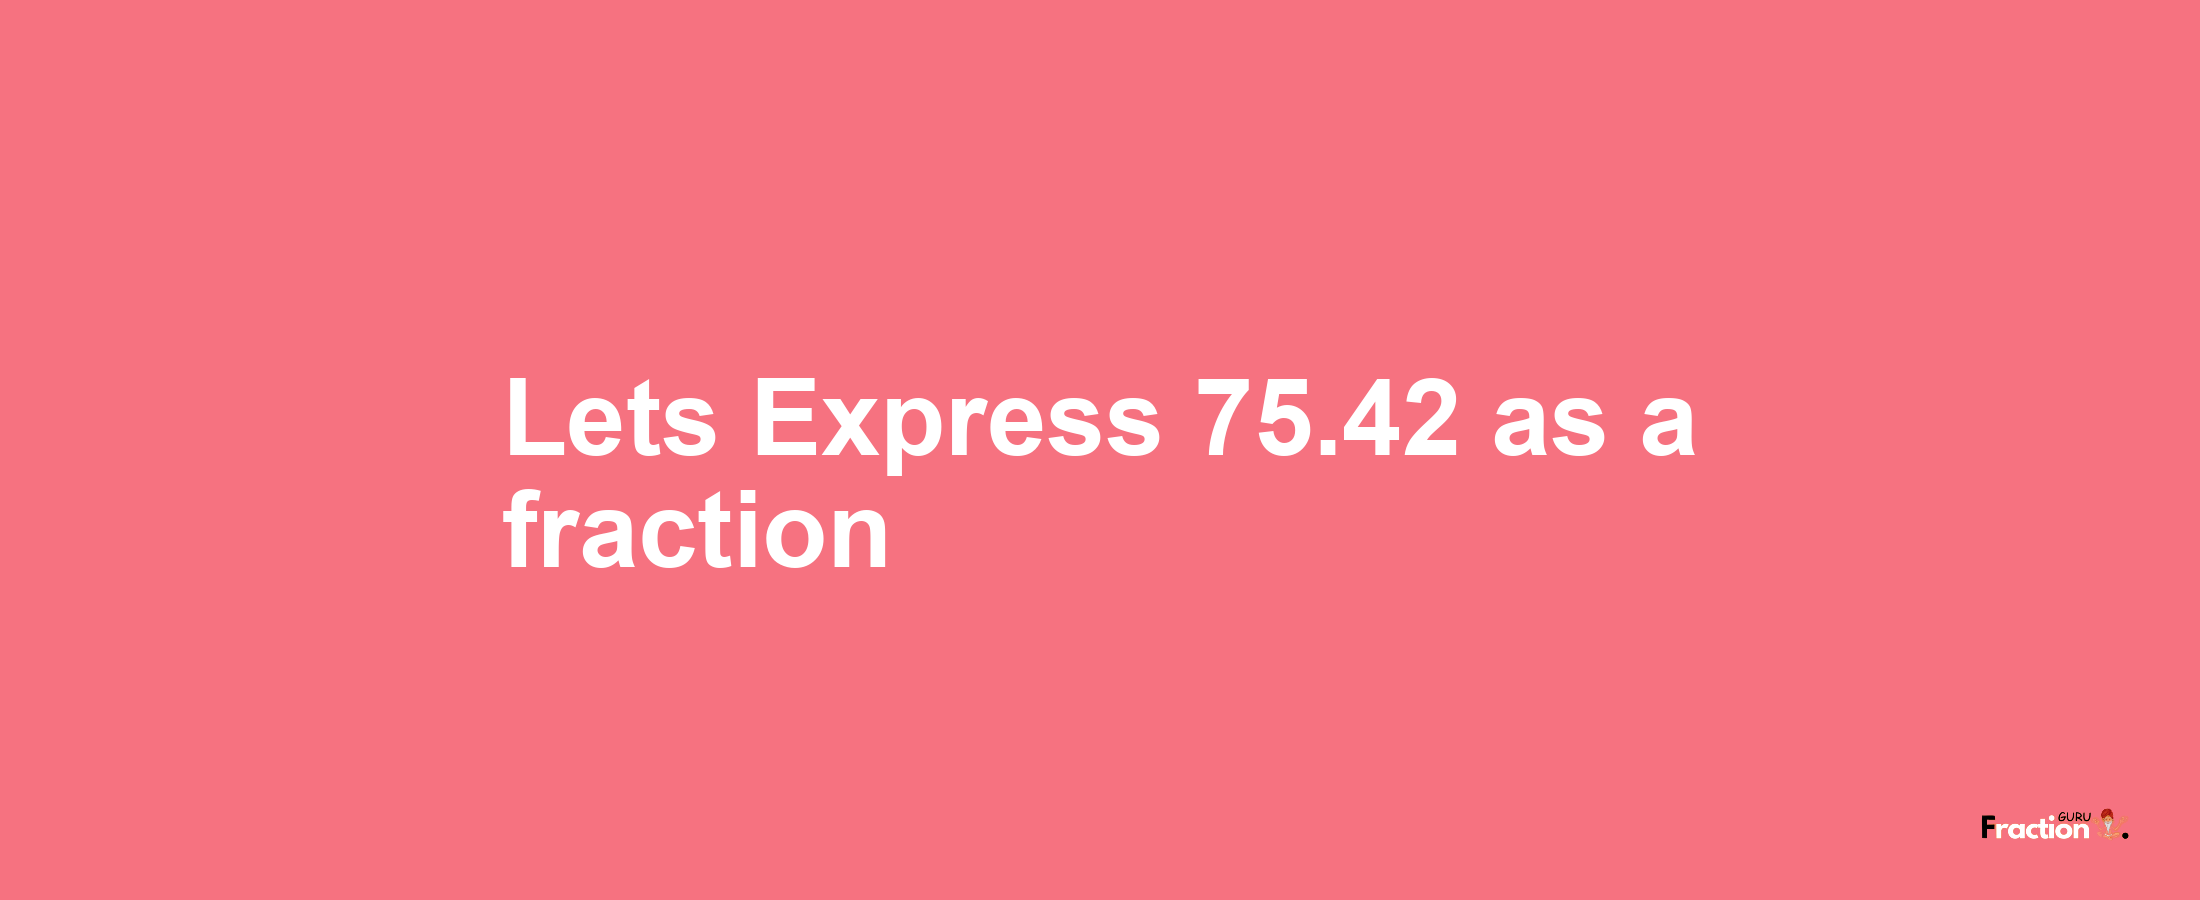 Lets Express 75.42 as afraction